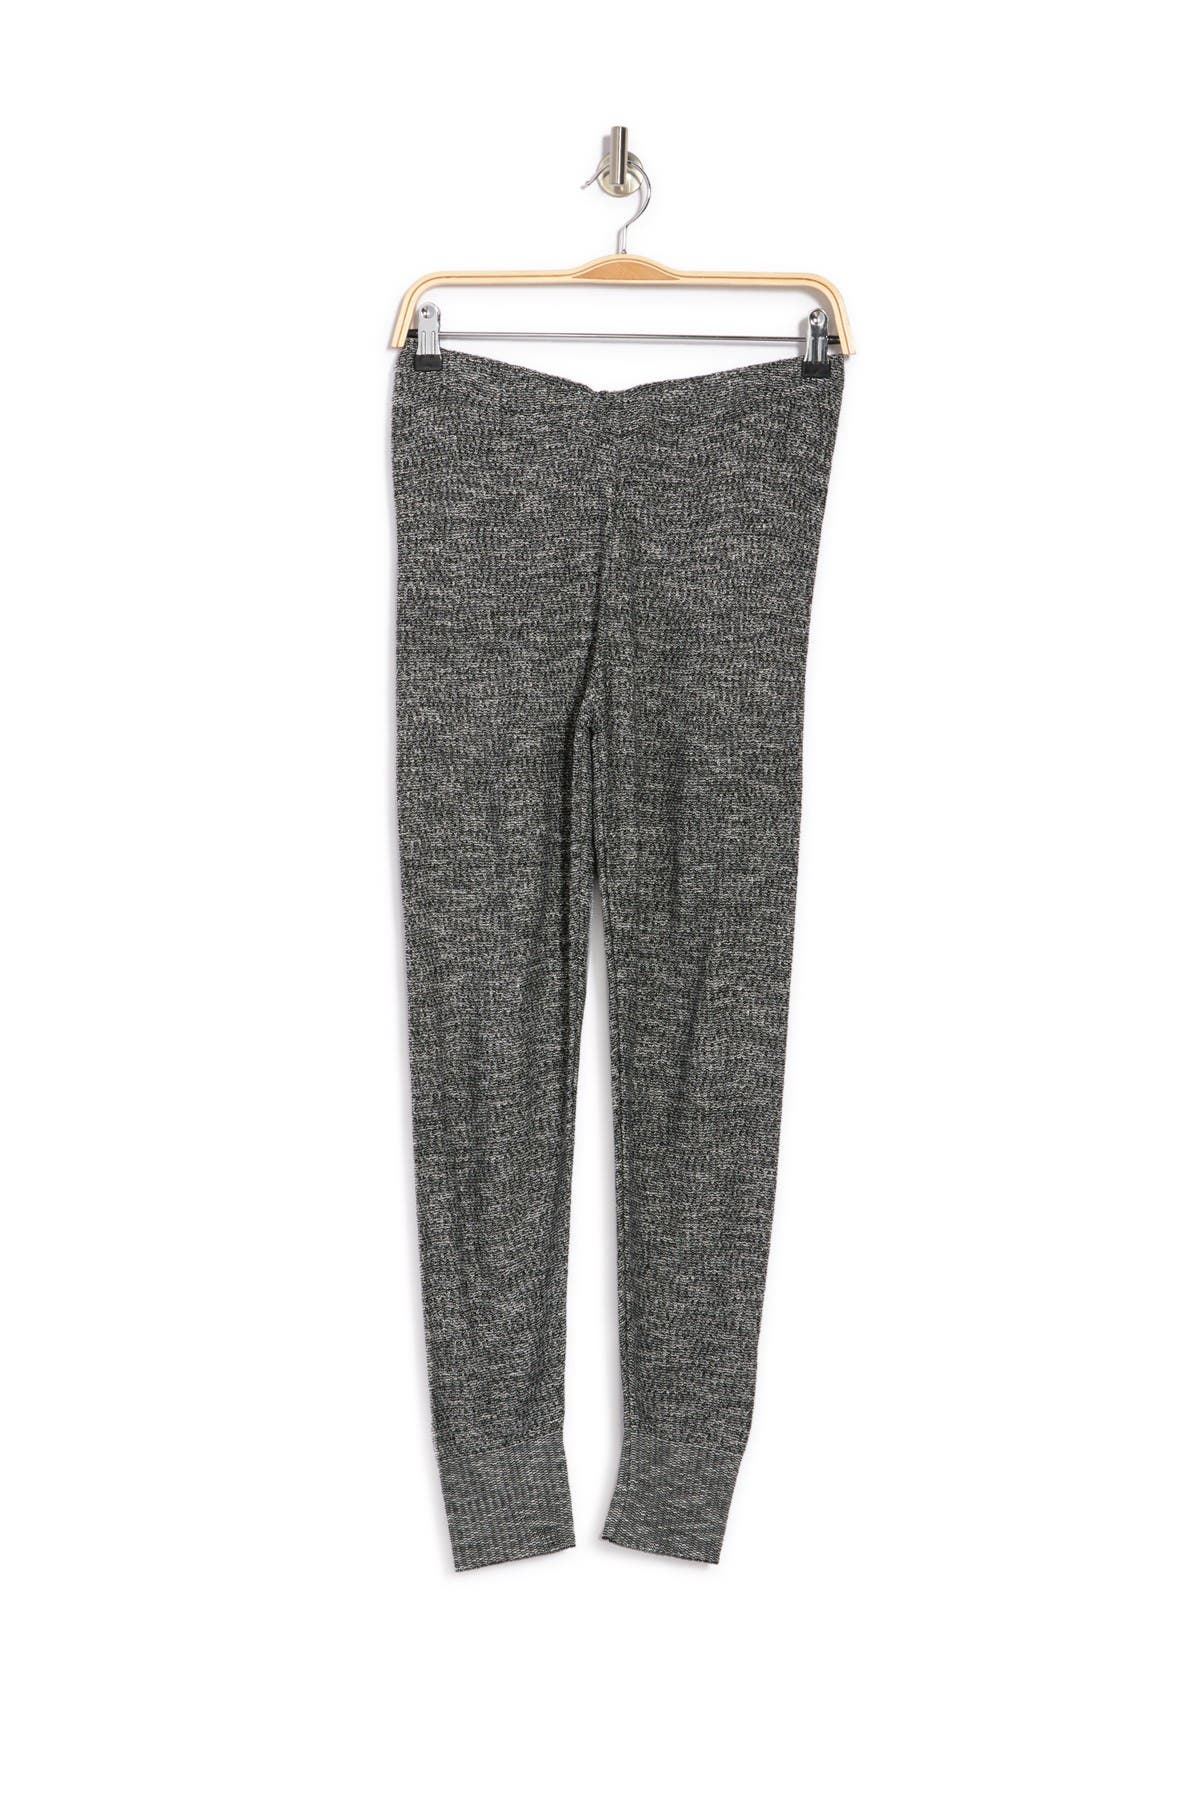 Abound Marled Knit Joggers In Black Stripe